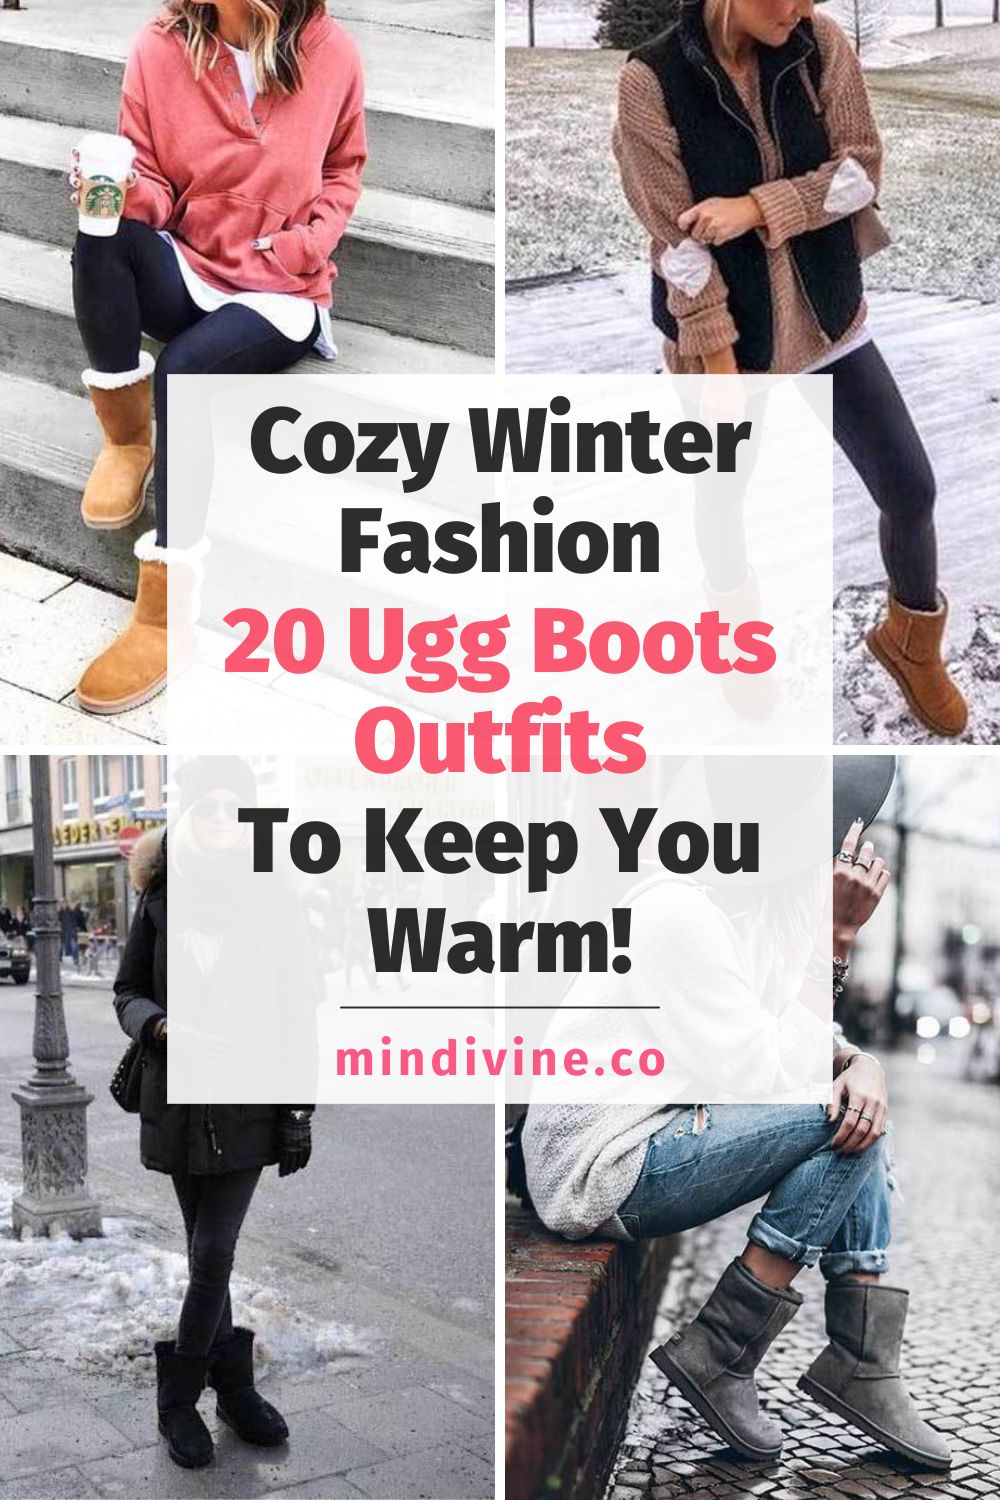 Cozy Winter Fashion: Ugg Boots Outfits